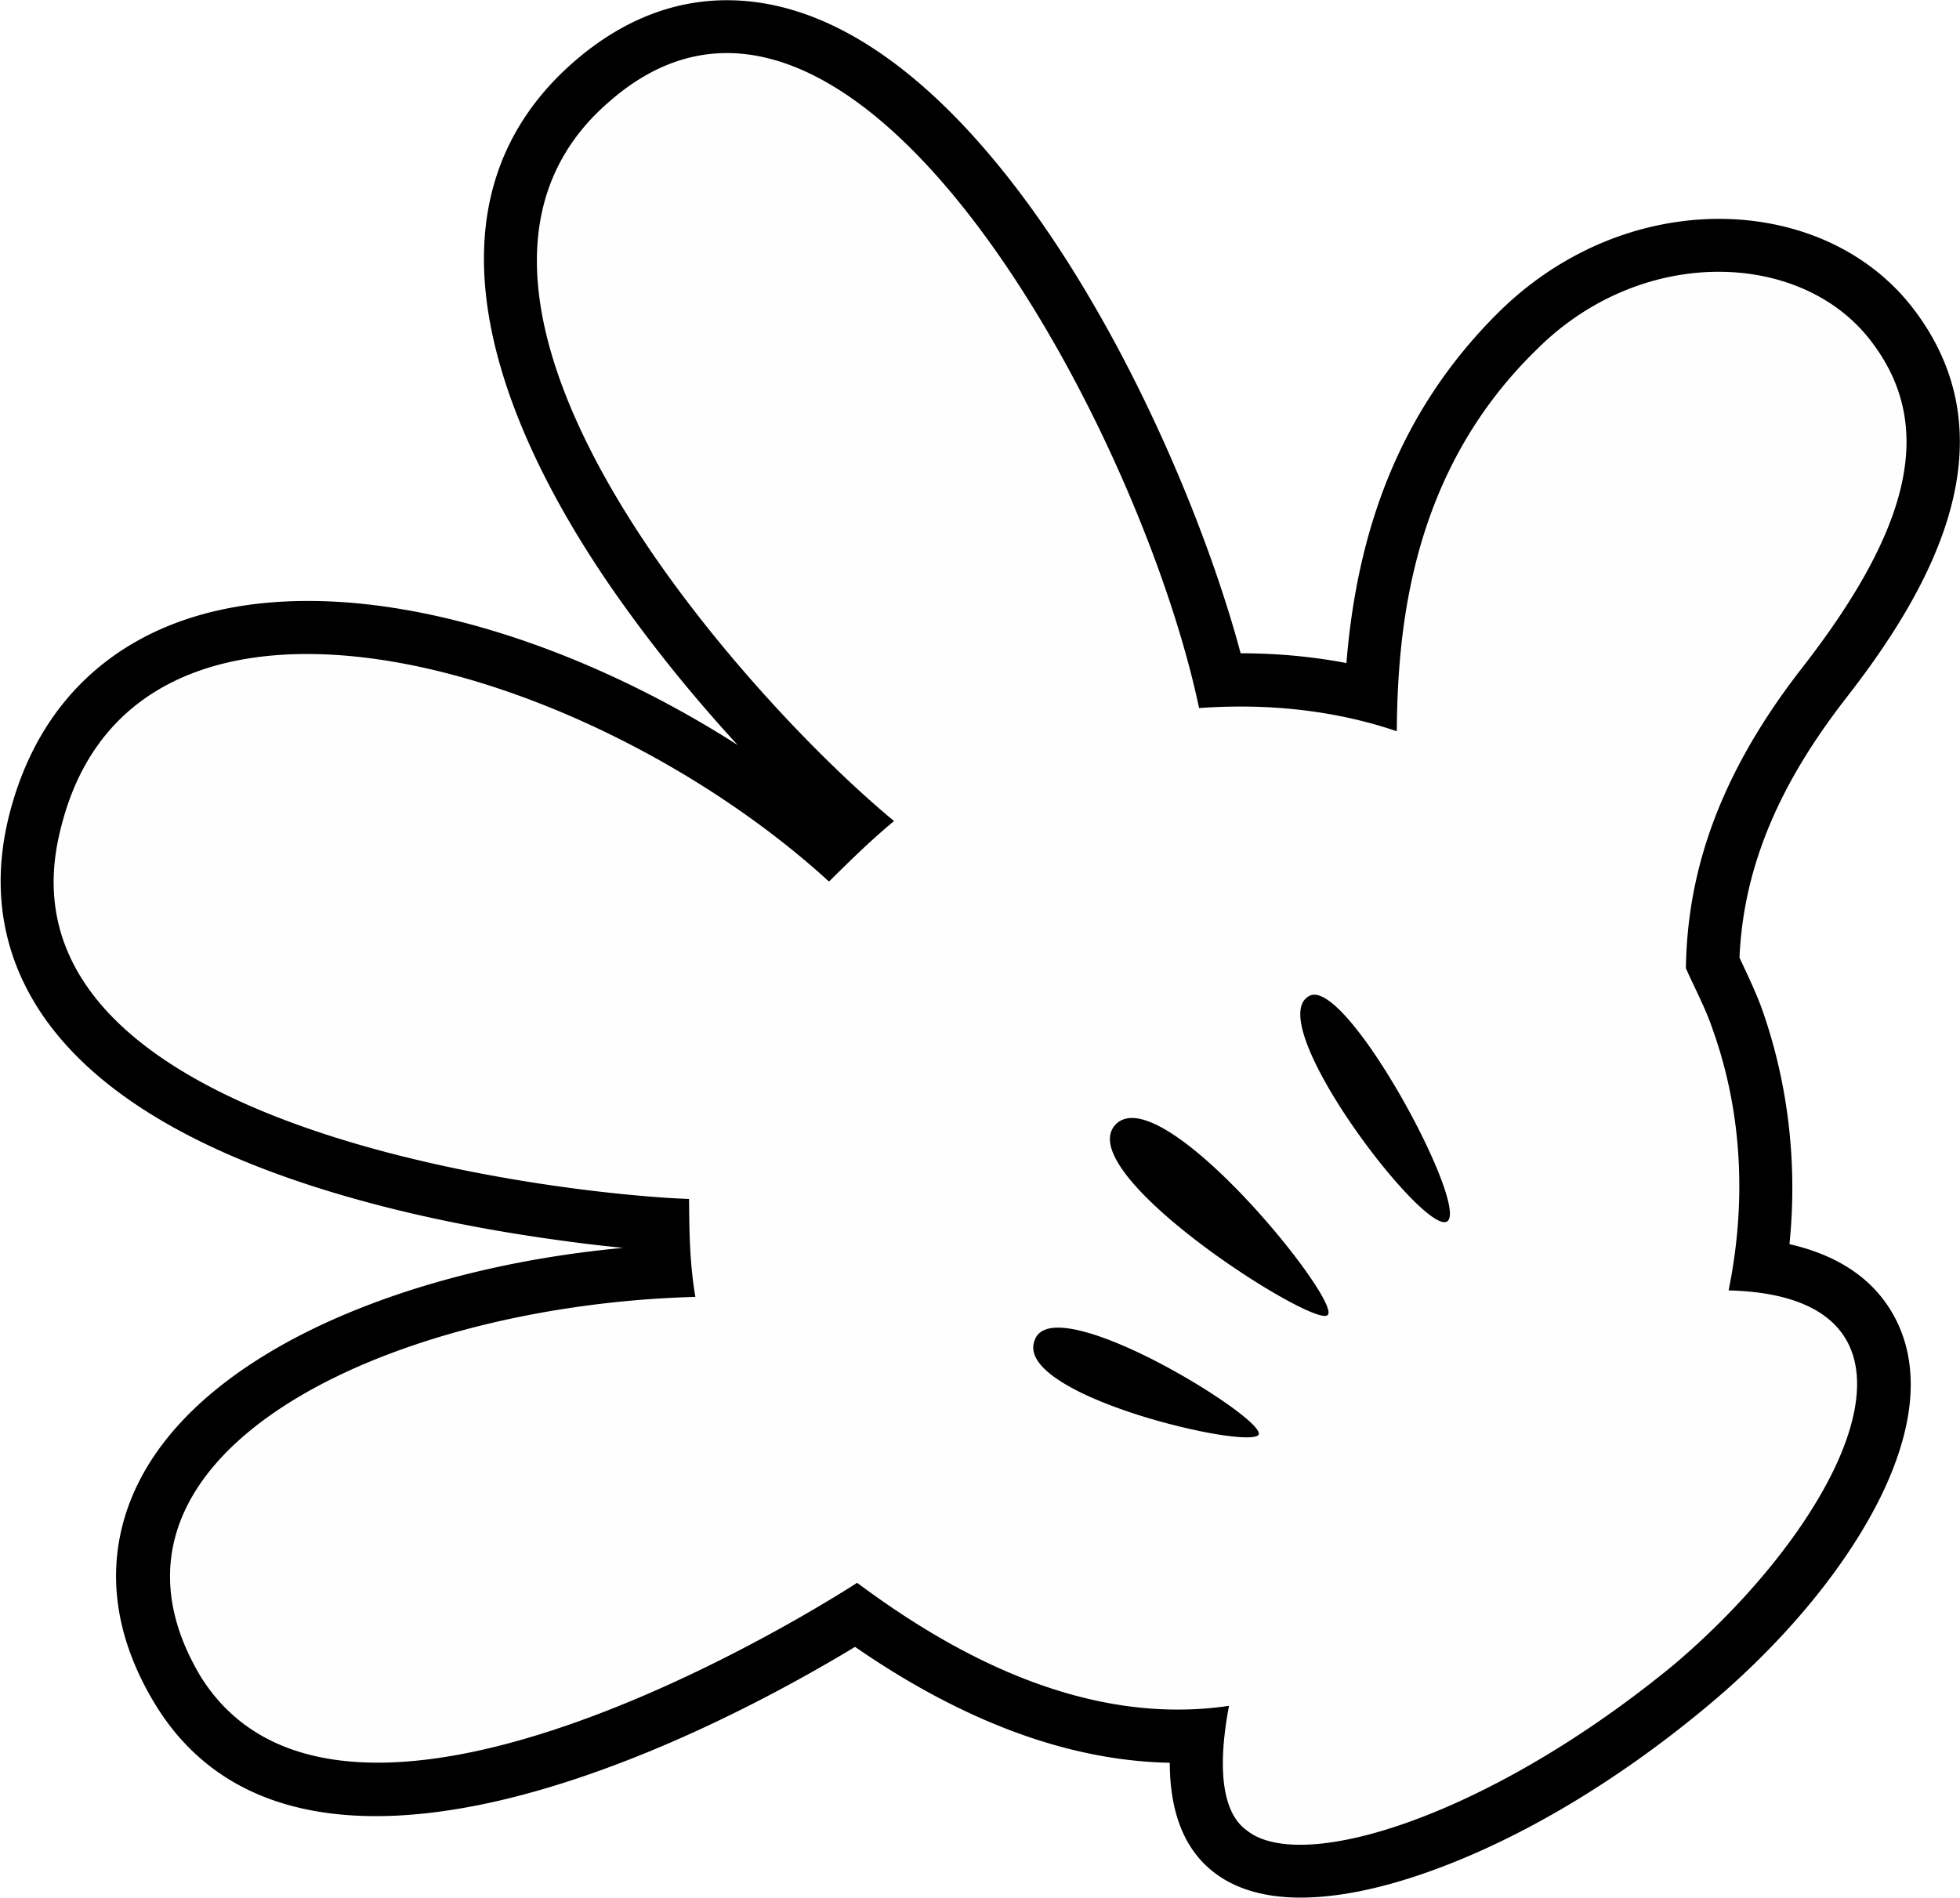 mickey mouse thumbs up clipart - photo #33